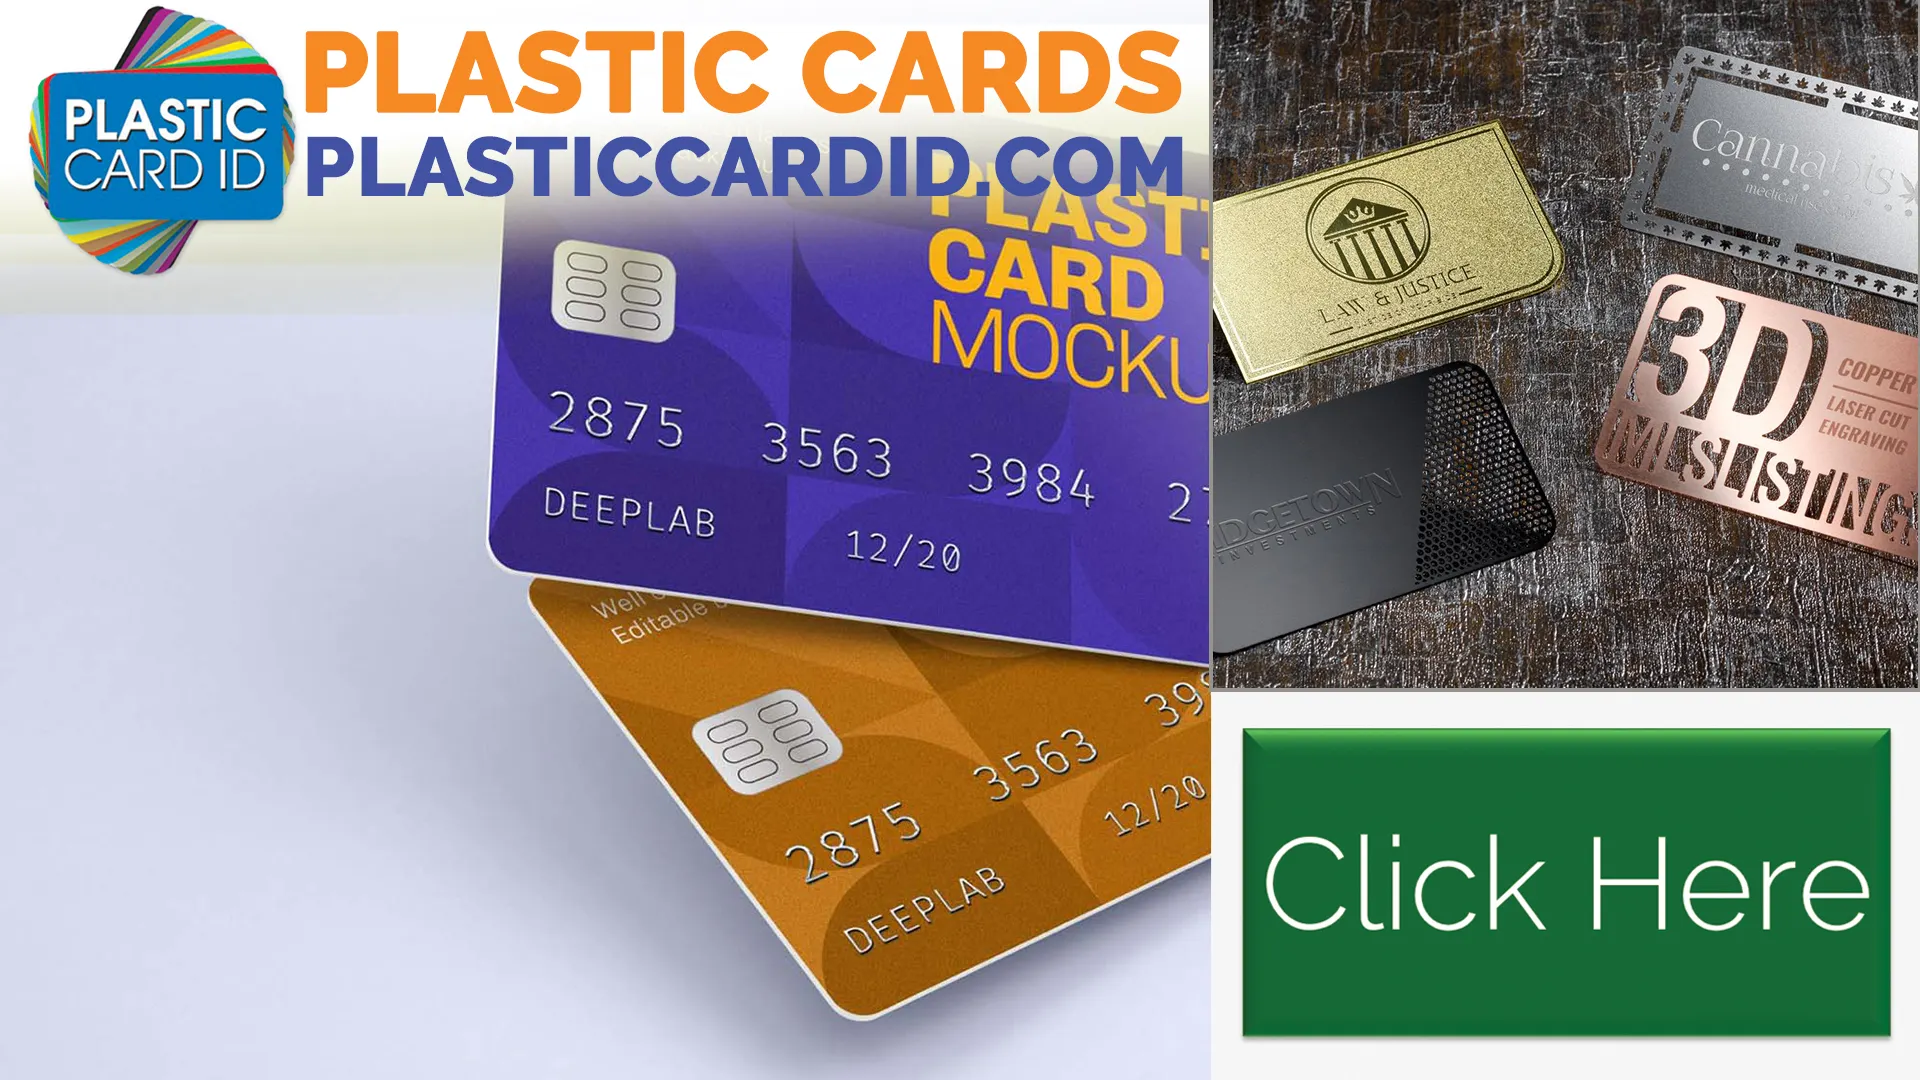 Welcome to Plastic Card ID




: Your Ultimate Destination for High-Quality Plastic Cards